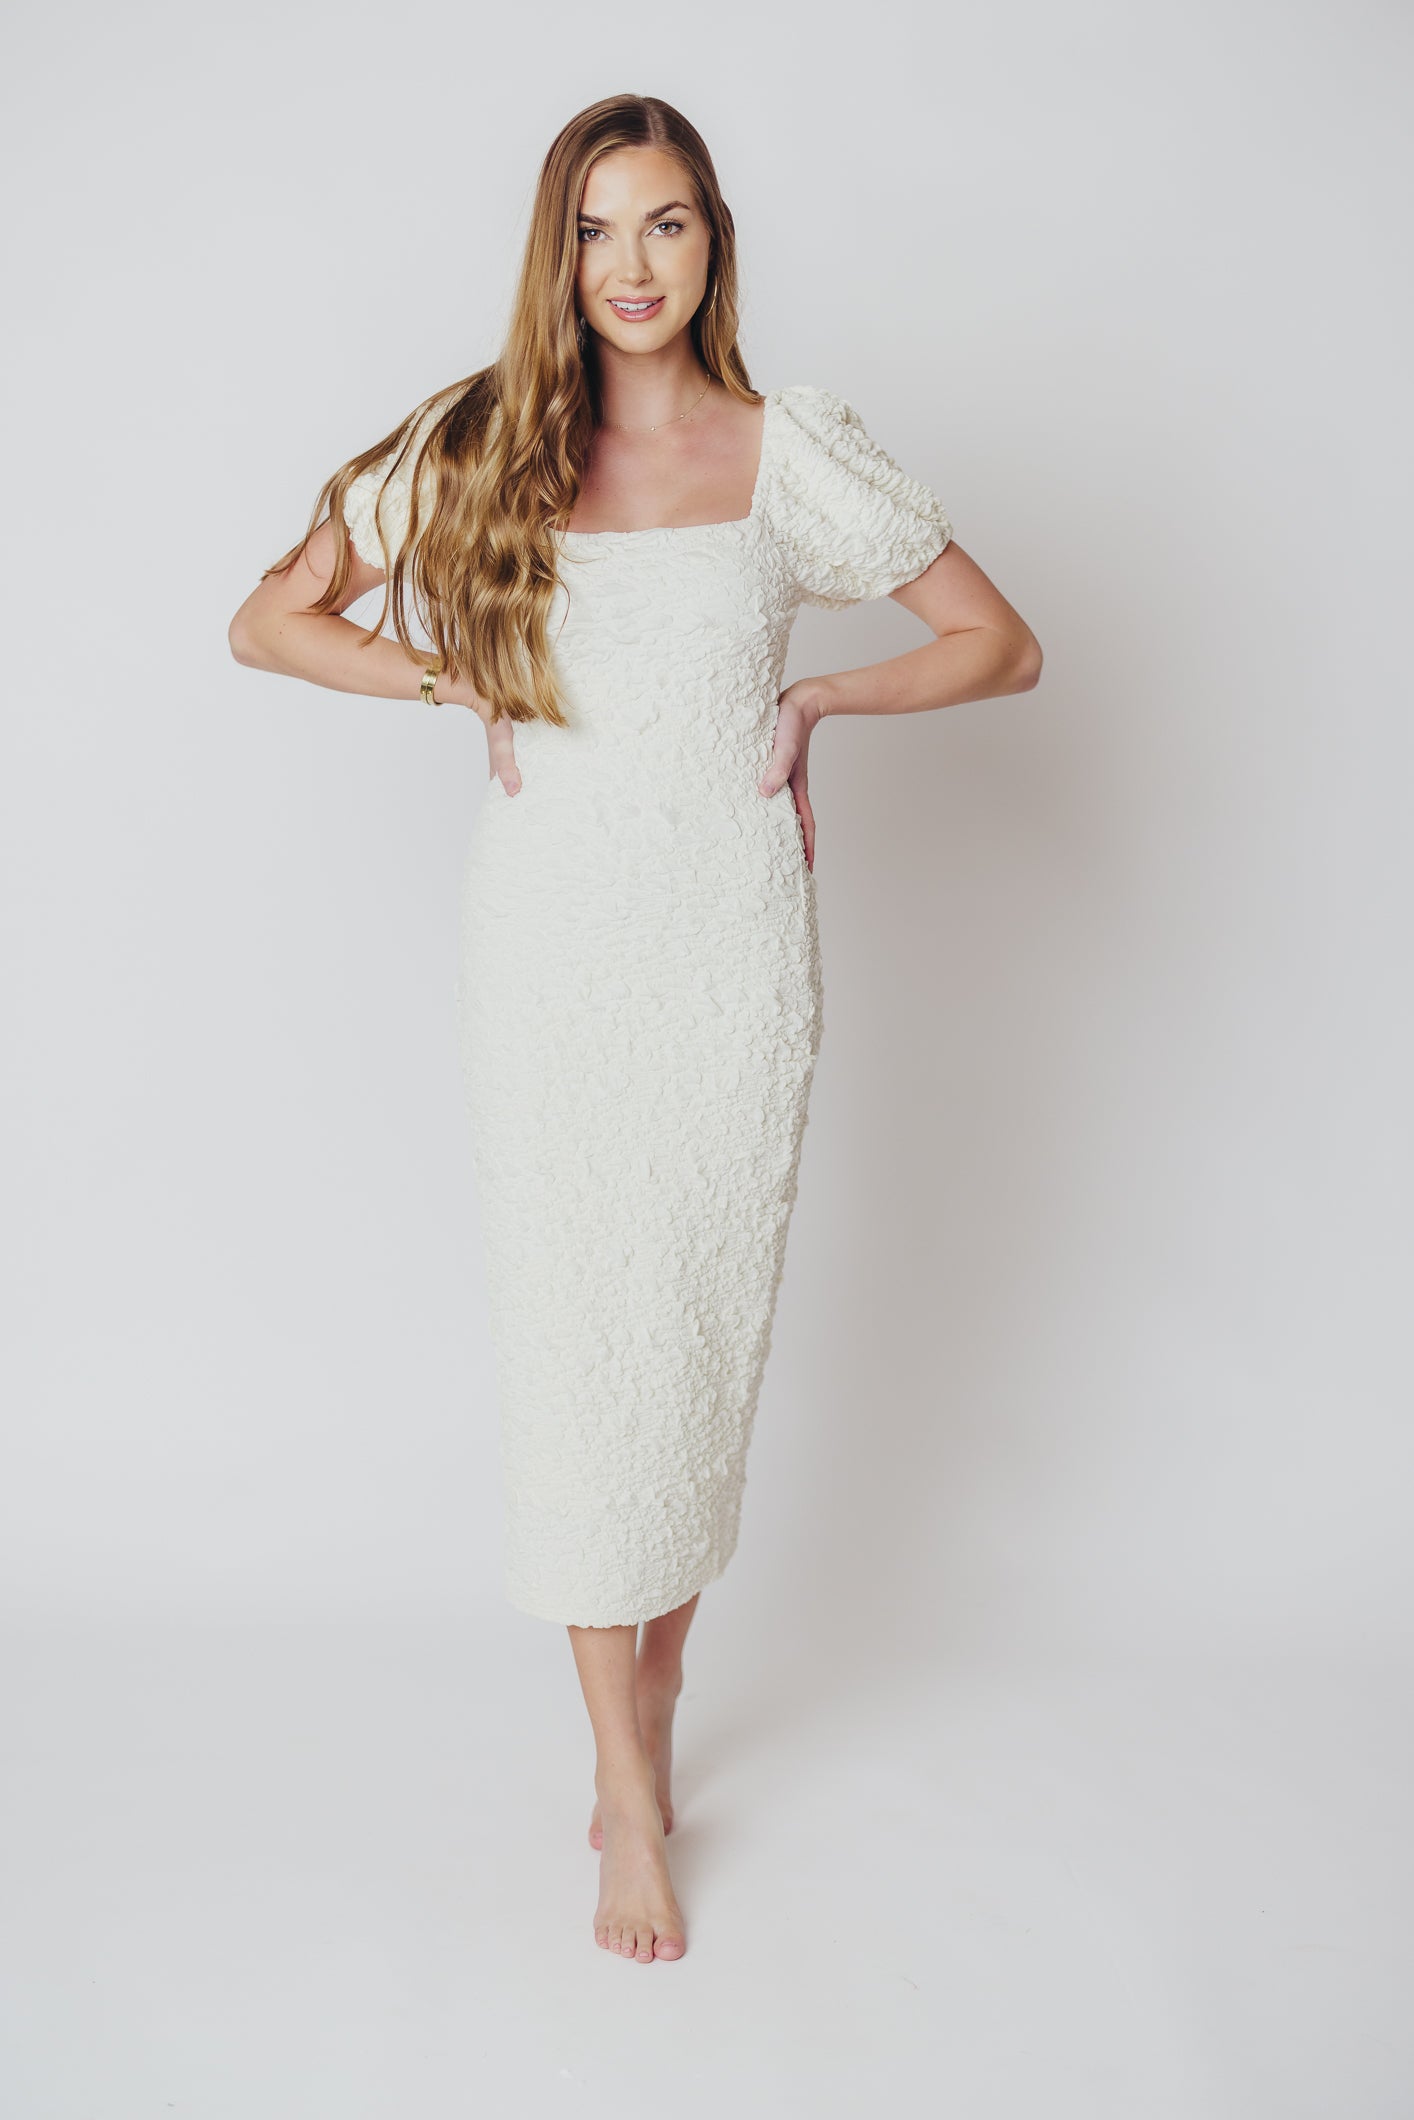 Blakeley Textured Midi Dress in Ivory - Bump Friendly & Inclusive Sizing (S-3XL)